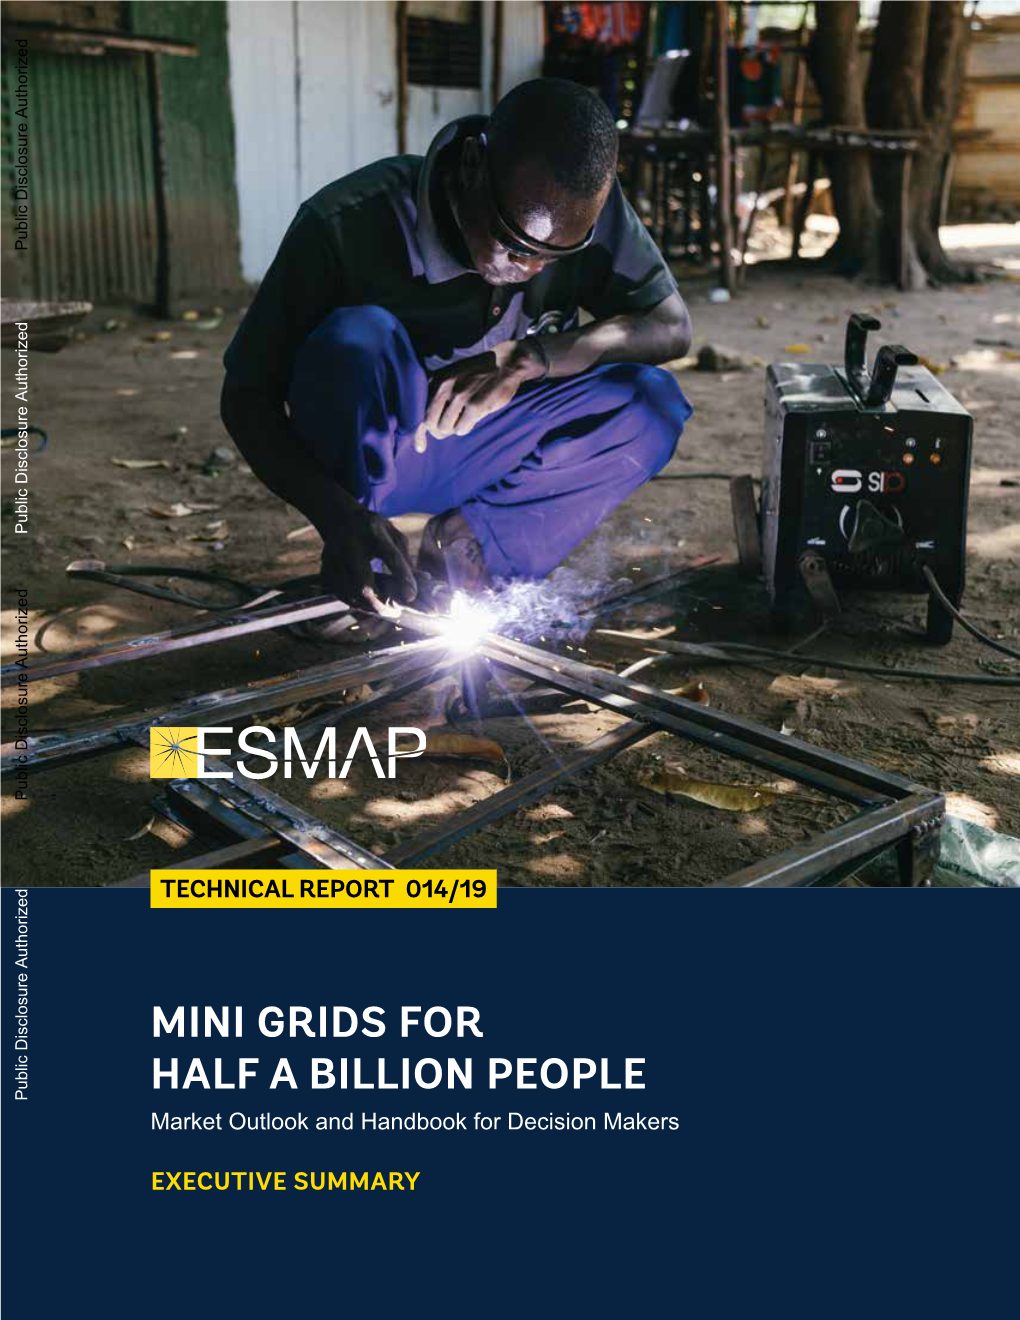 Mini Grids for Half a Billion People: Market Outlook and Handbook for Decision Makers